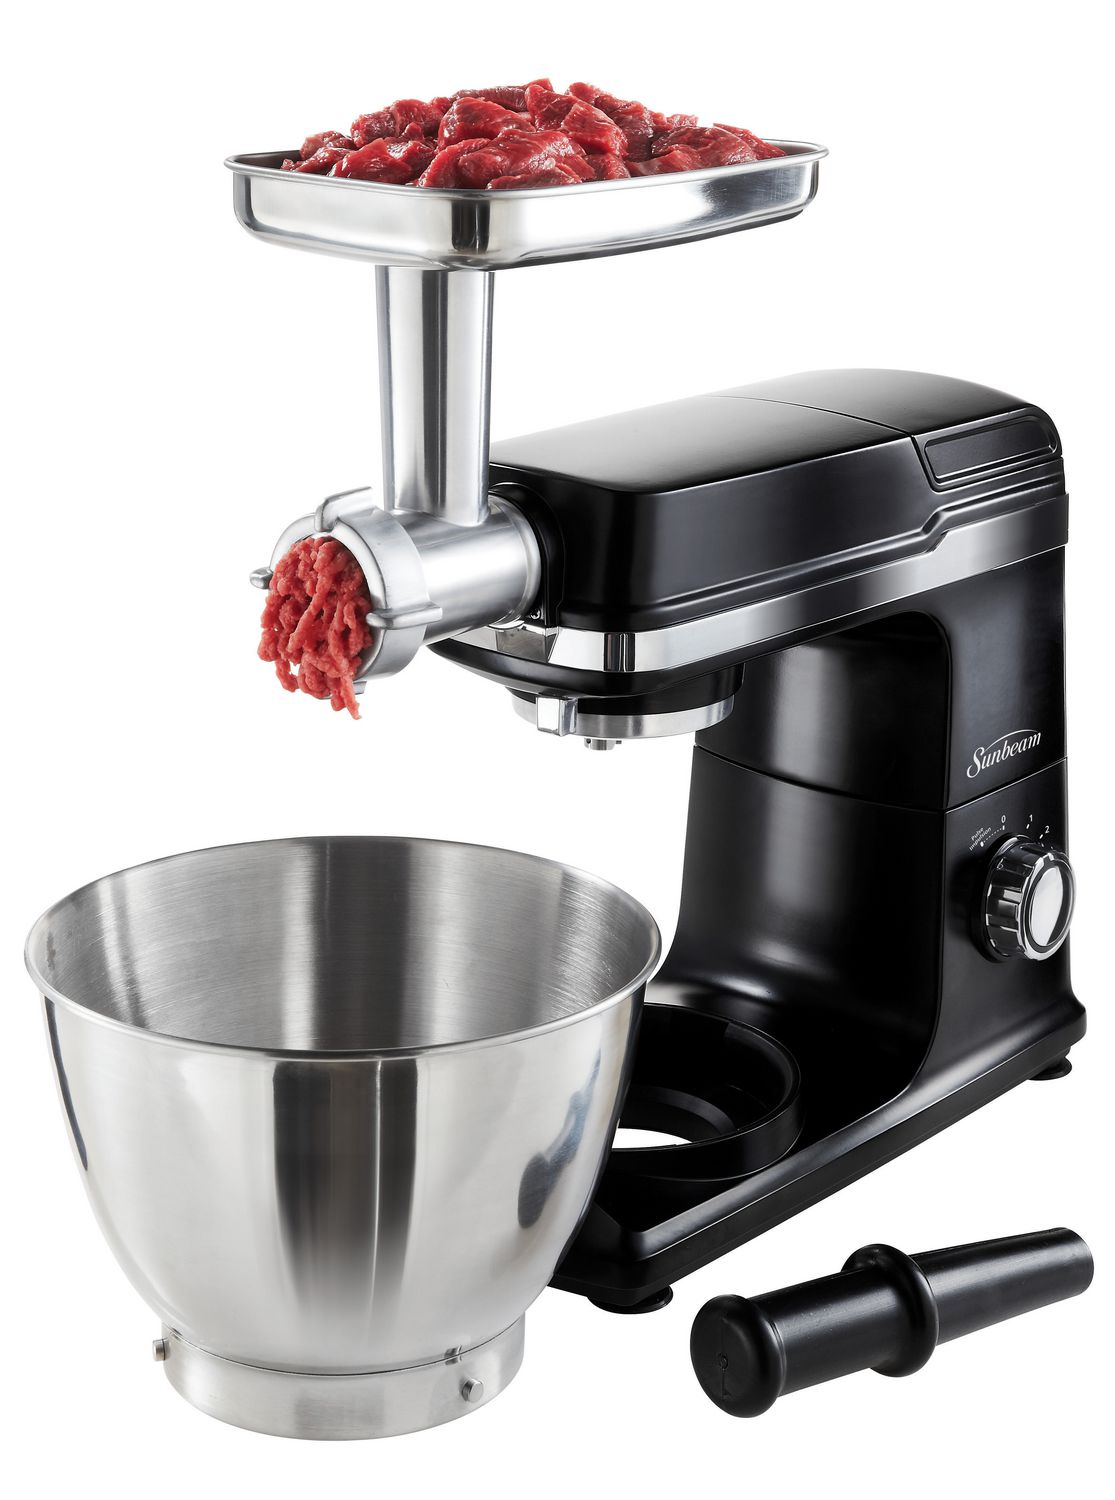 Sunbeam Planetary Stand Mixer Meat Grinder Accessory Walmart Canada